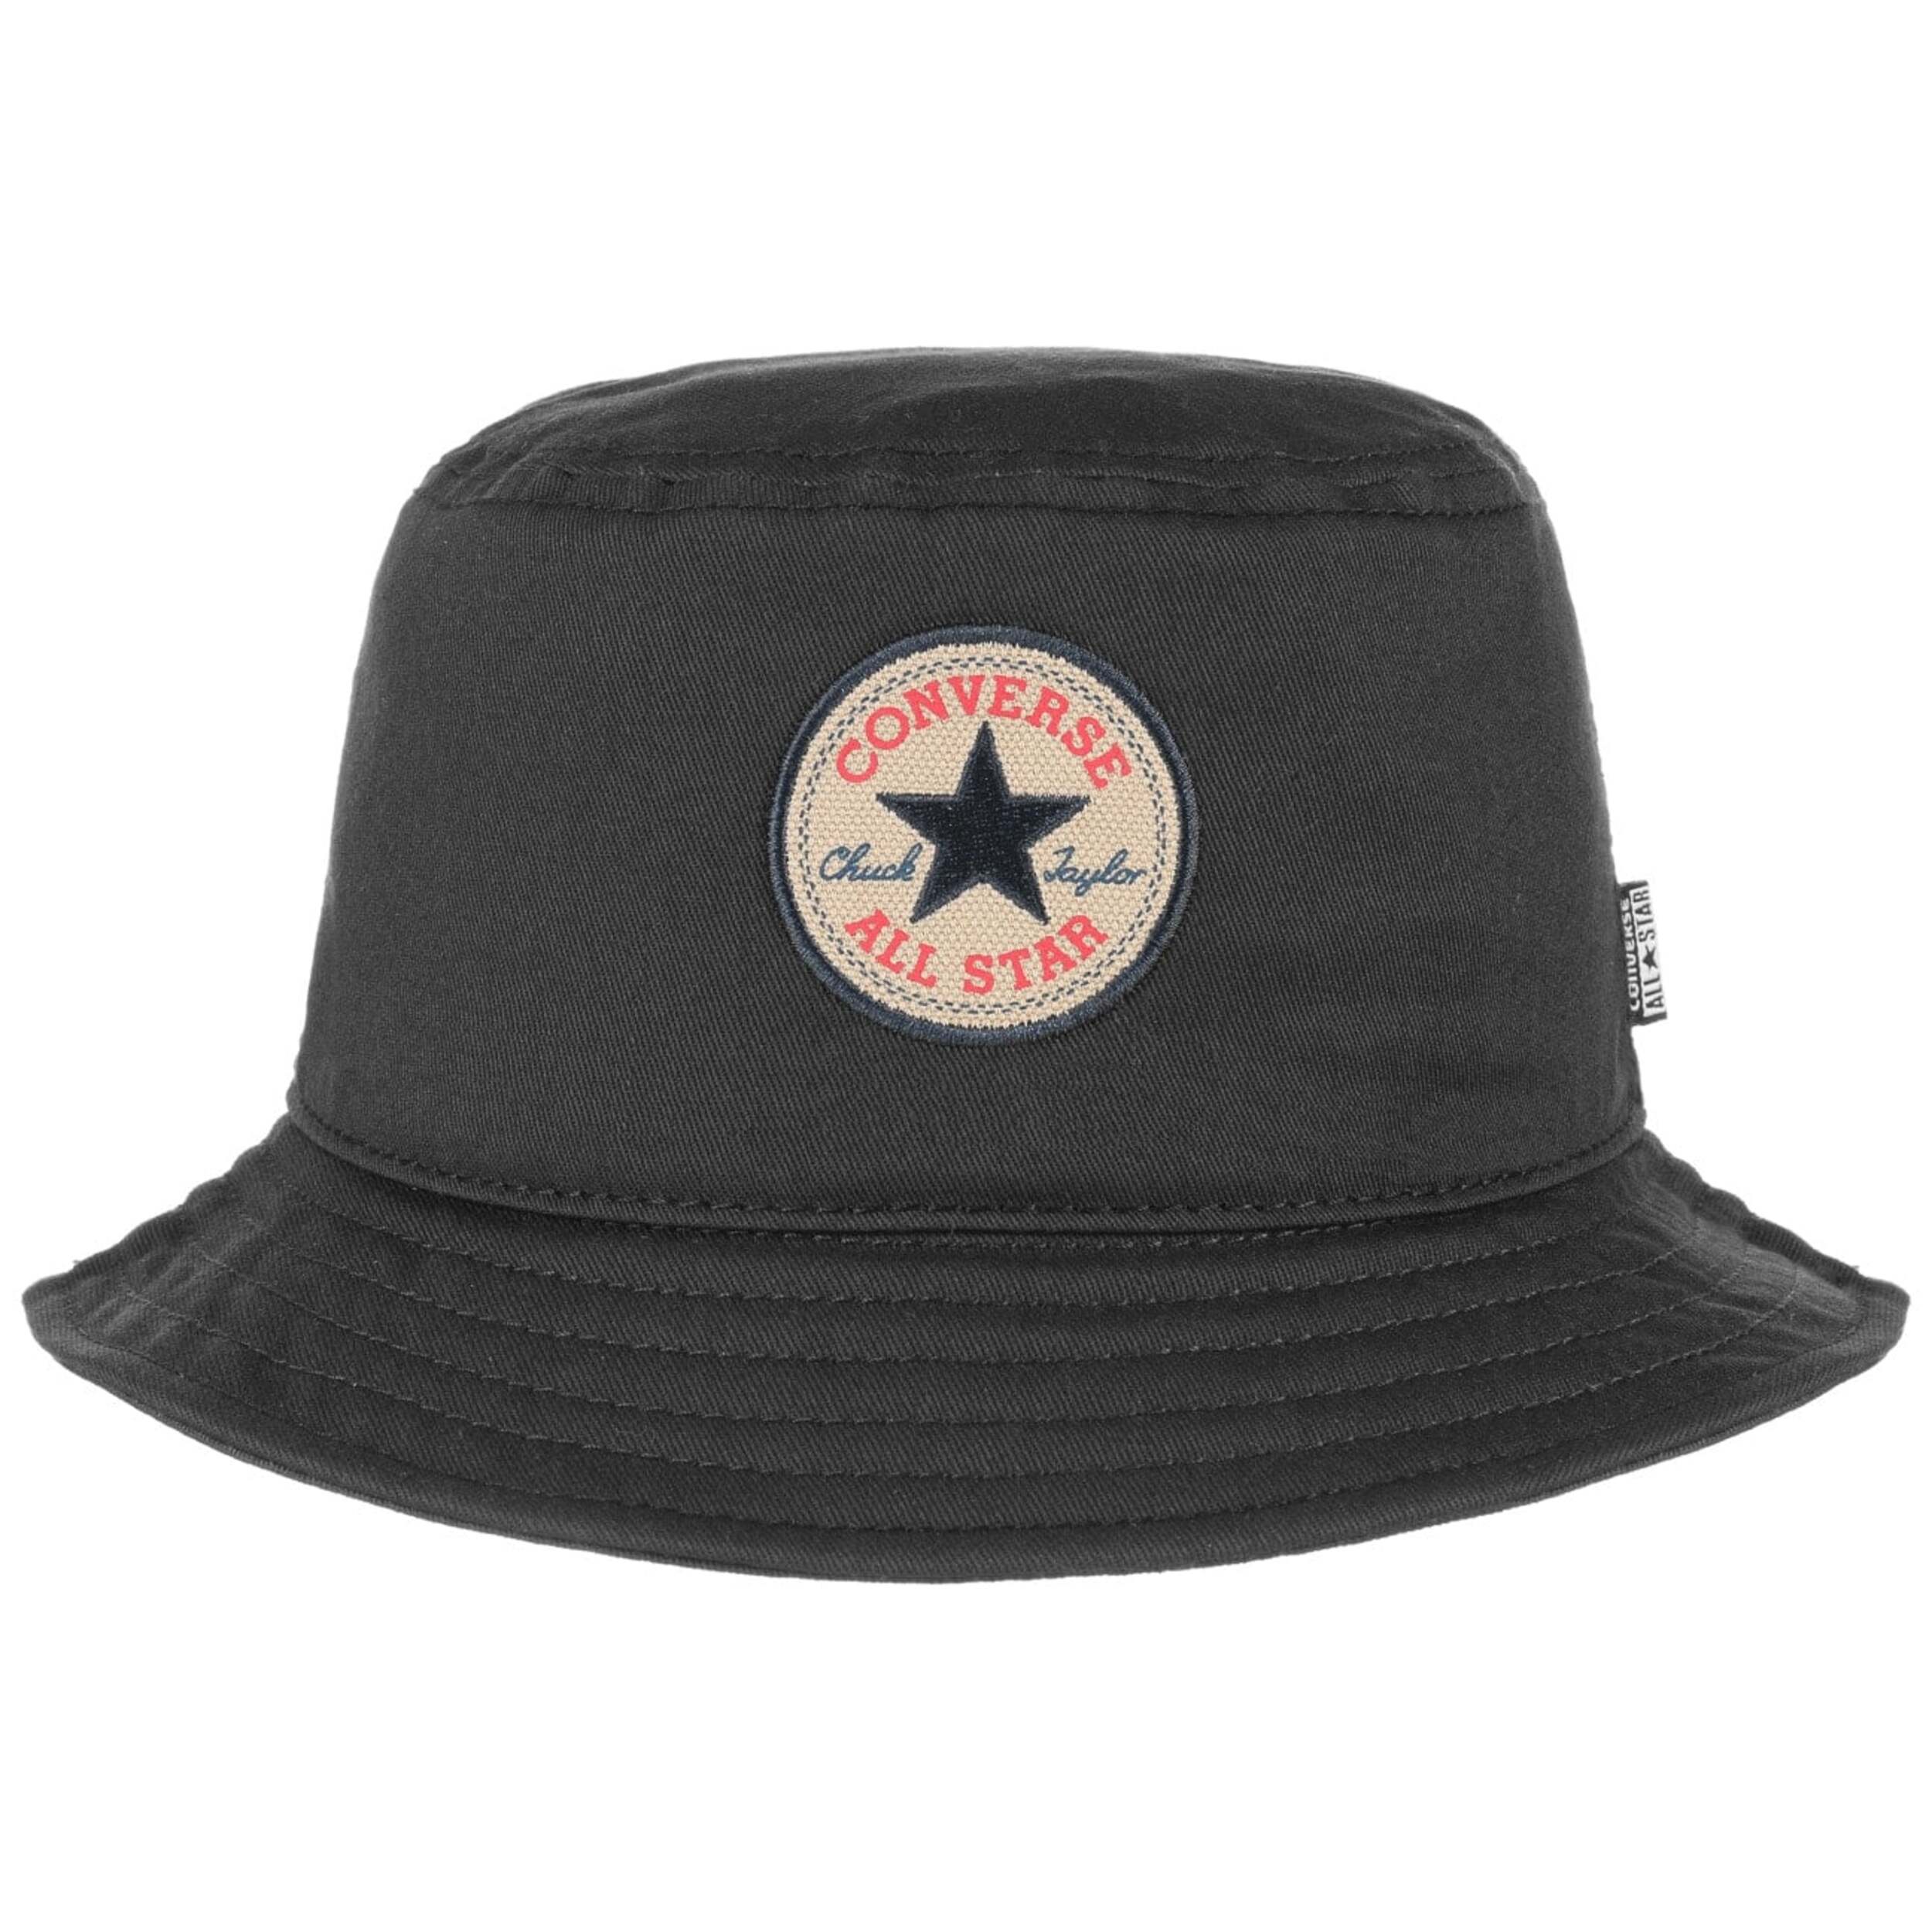 Classic Bucket Hat by Converse - 27,95 £